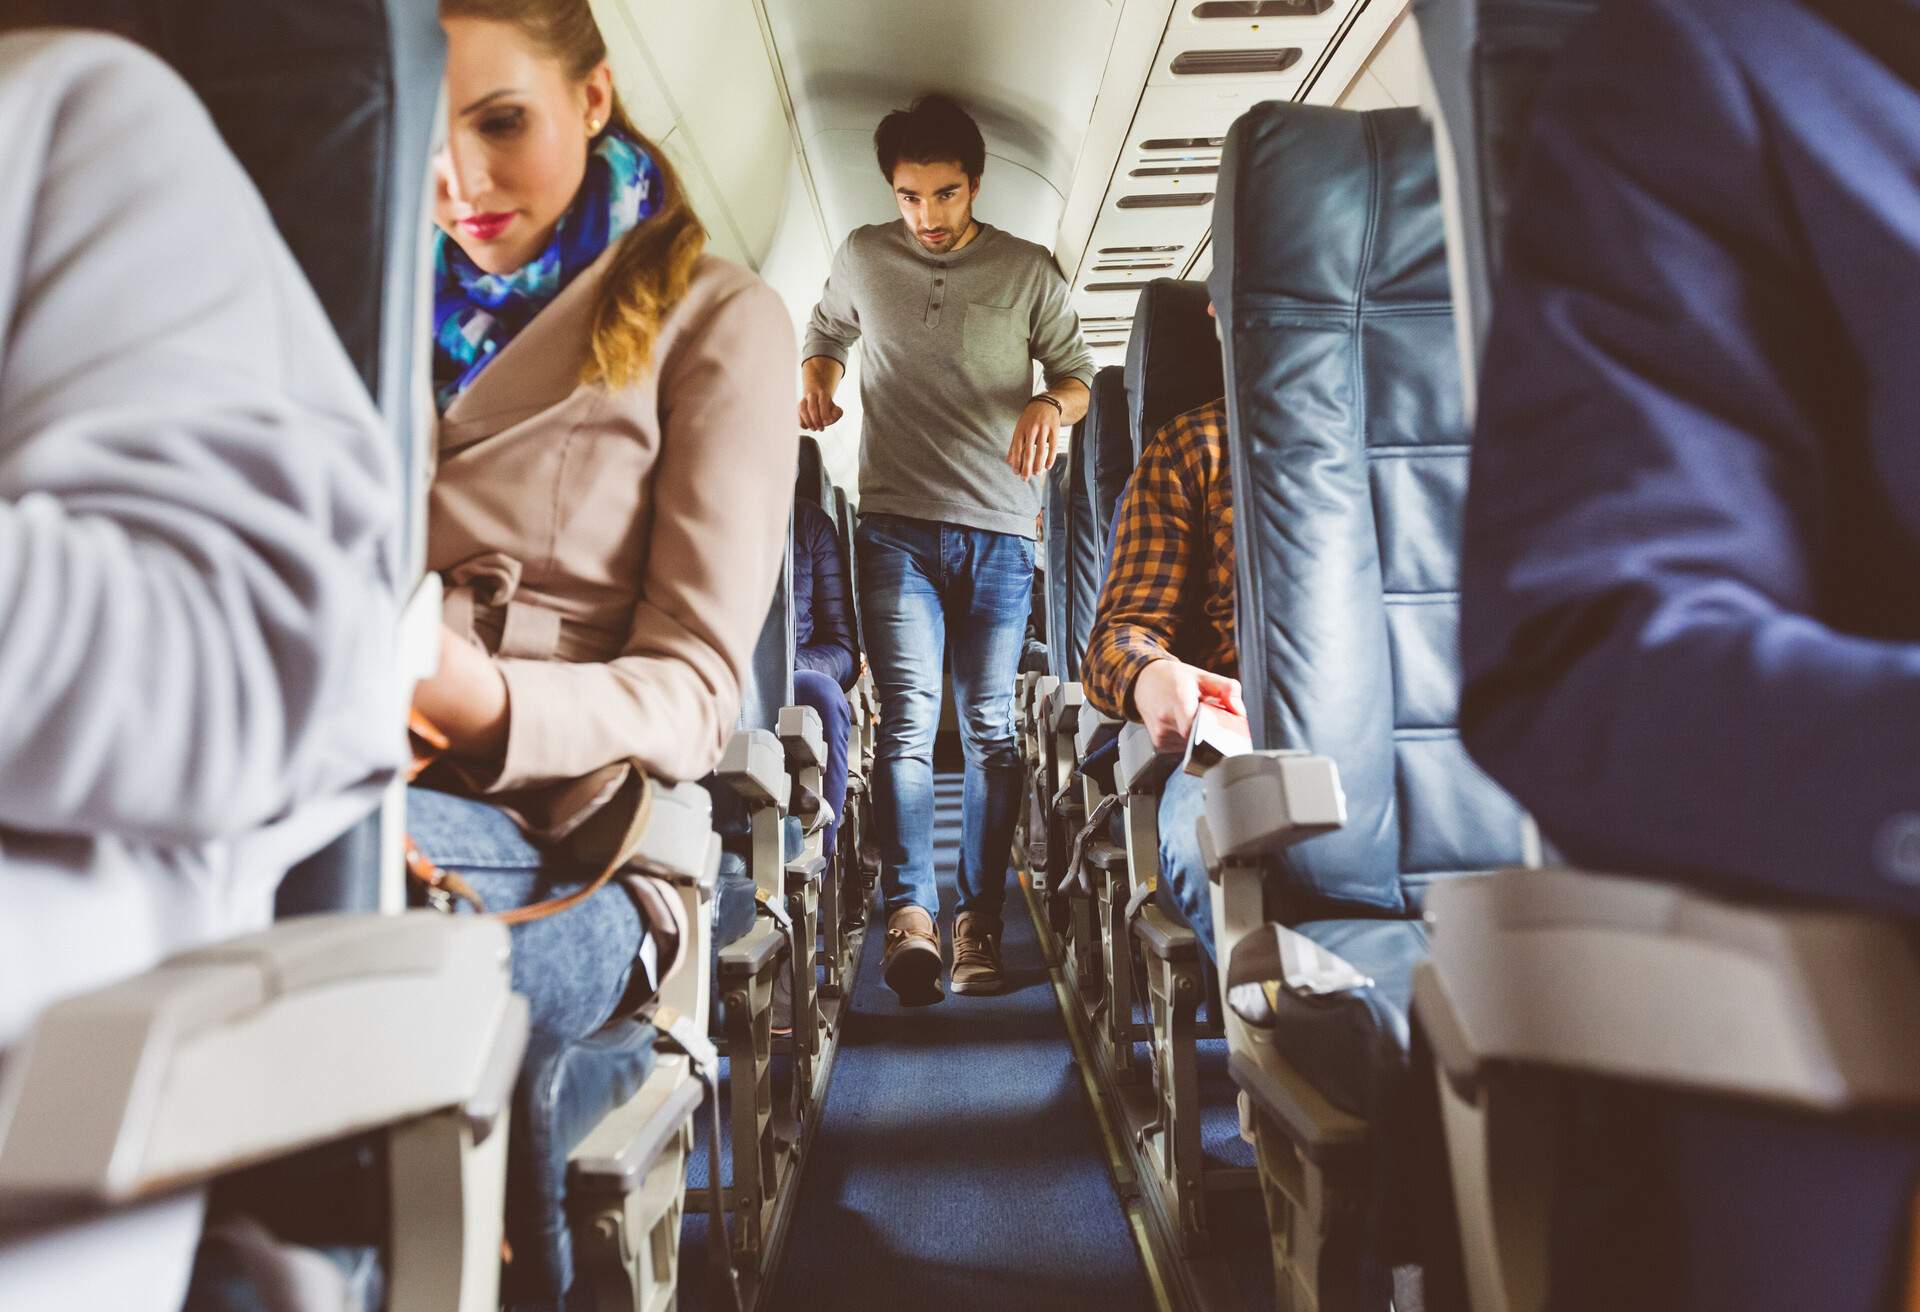 A man walks on an airplane cabin's aisle across seats with sitting passengers.